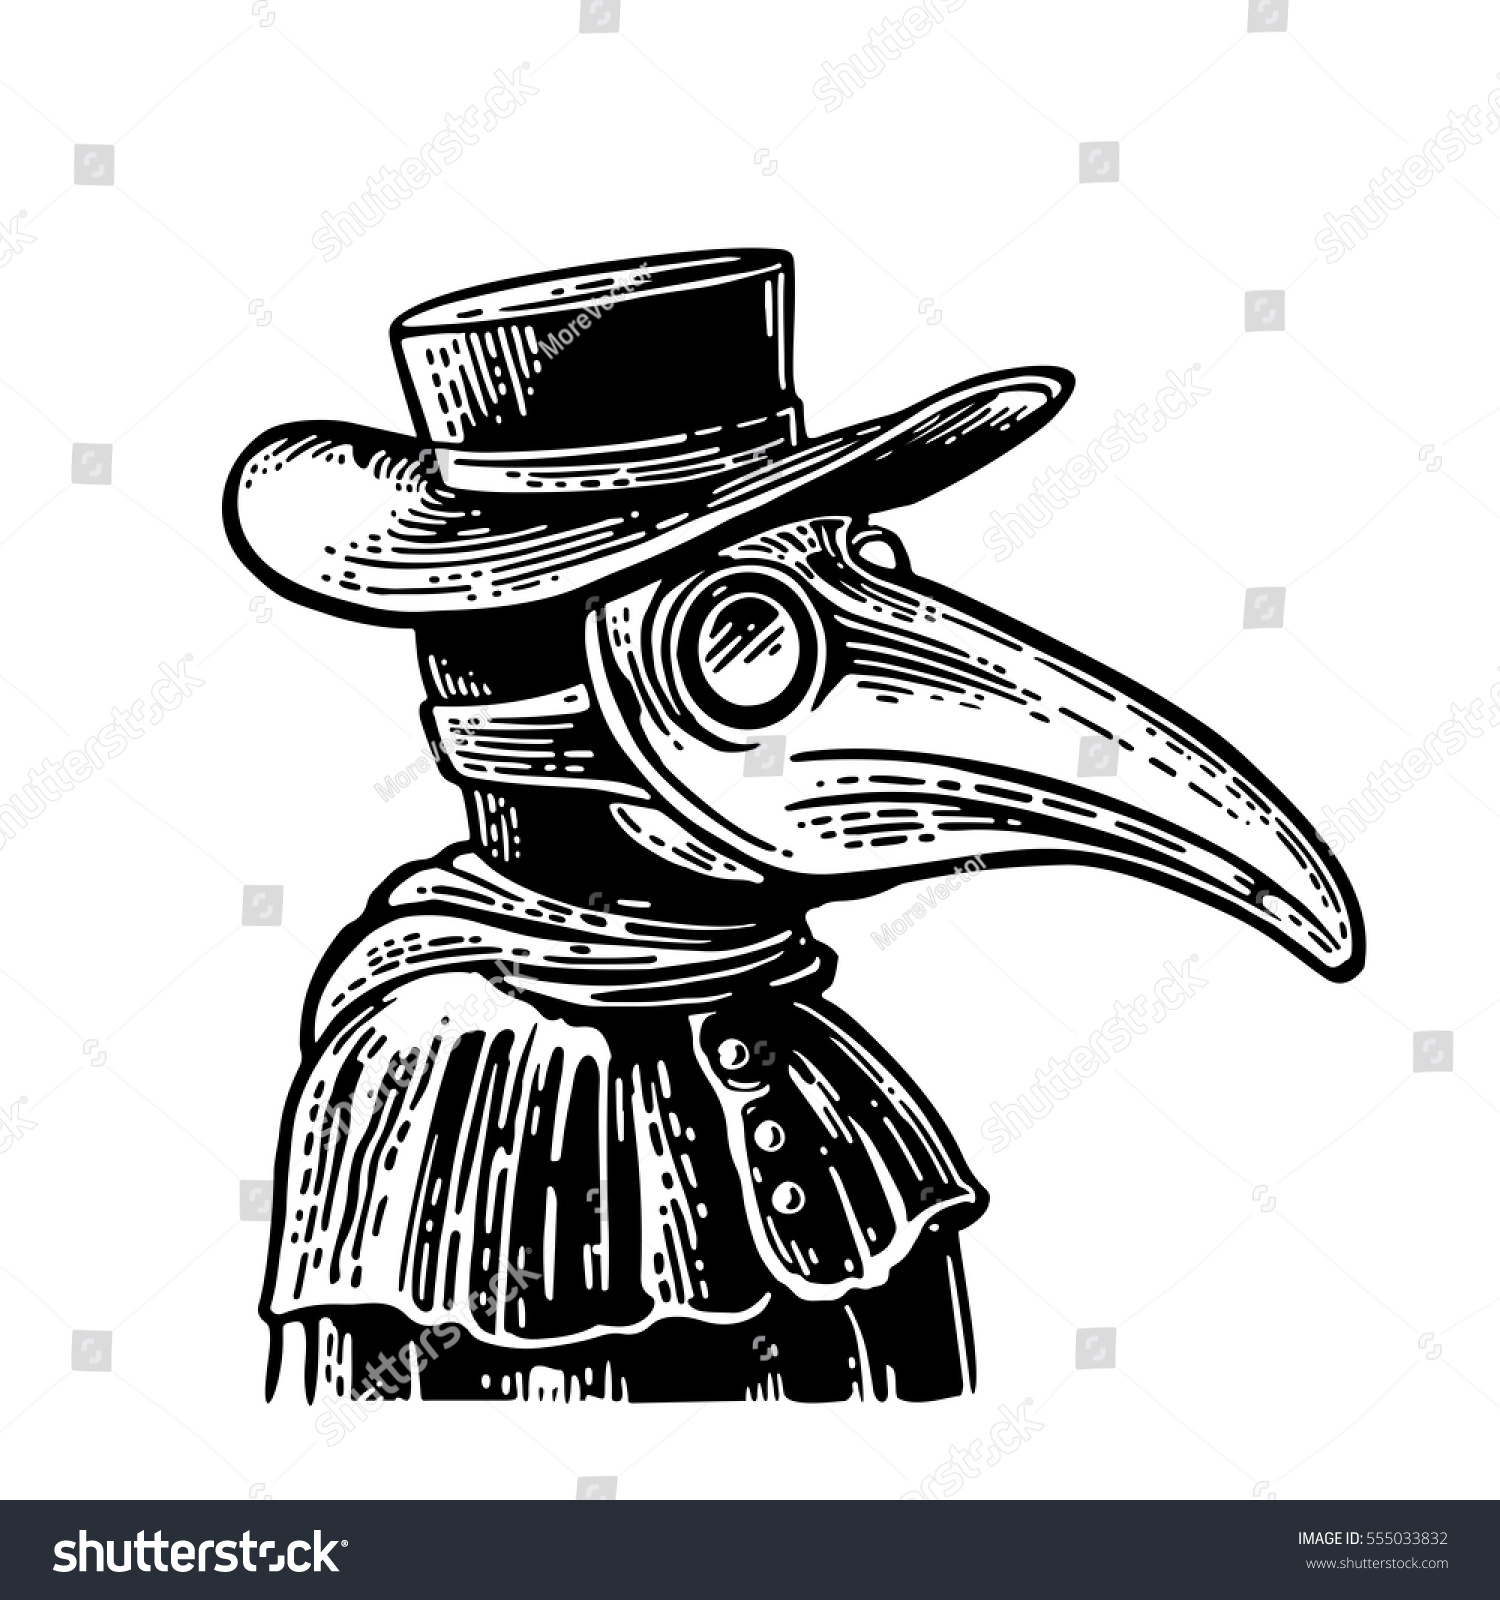 SVG of Plague doctor with bird mask and hat. Vector black vintage engraving illustration isolated on a white background. Hand drawn design element for poster quarantine coronavirus svg